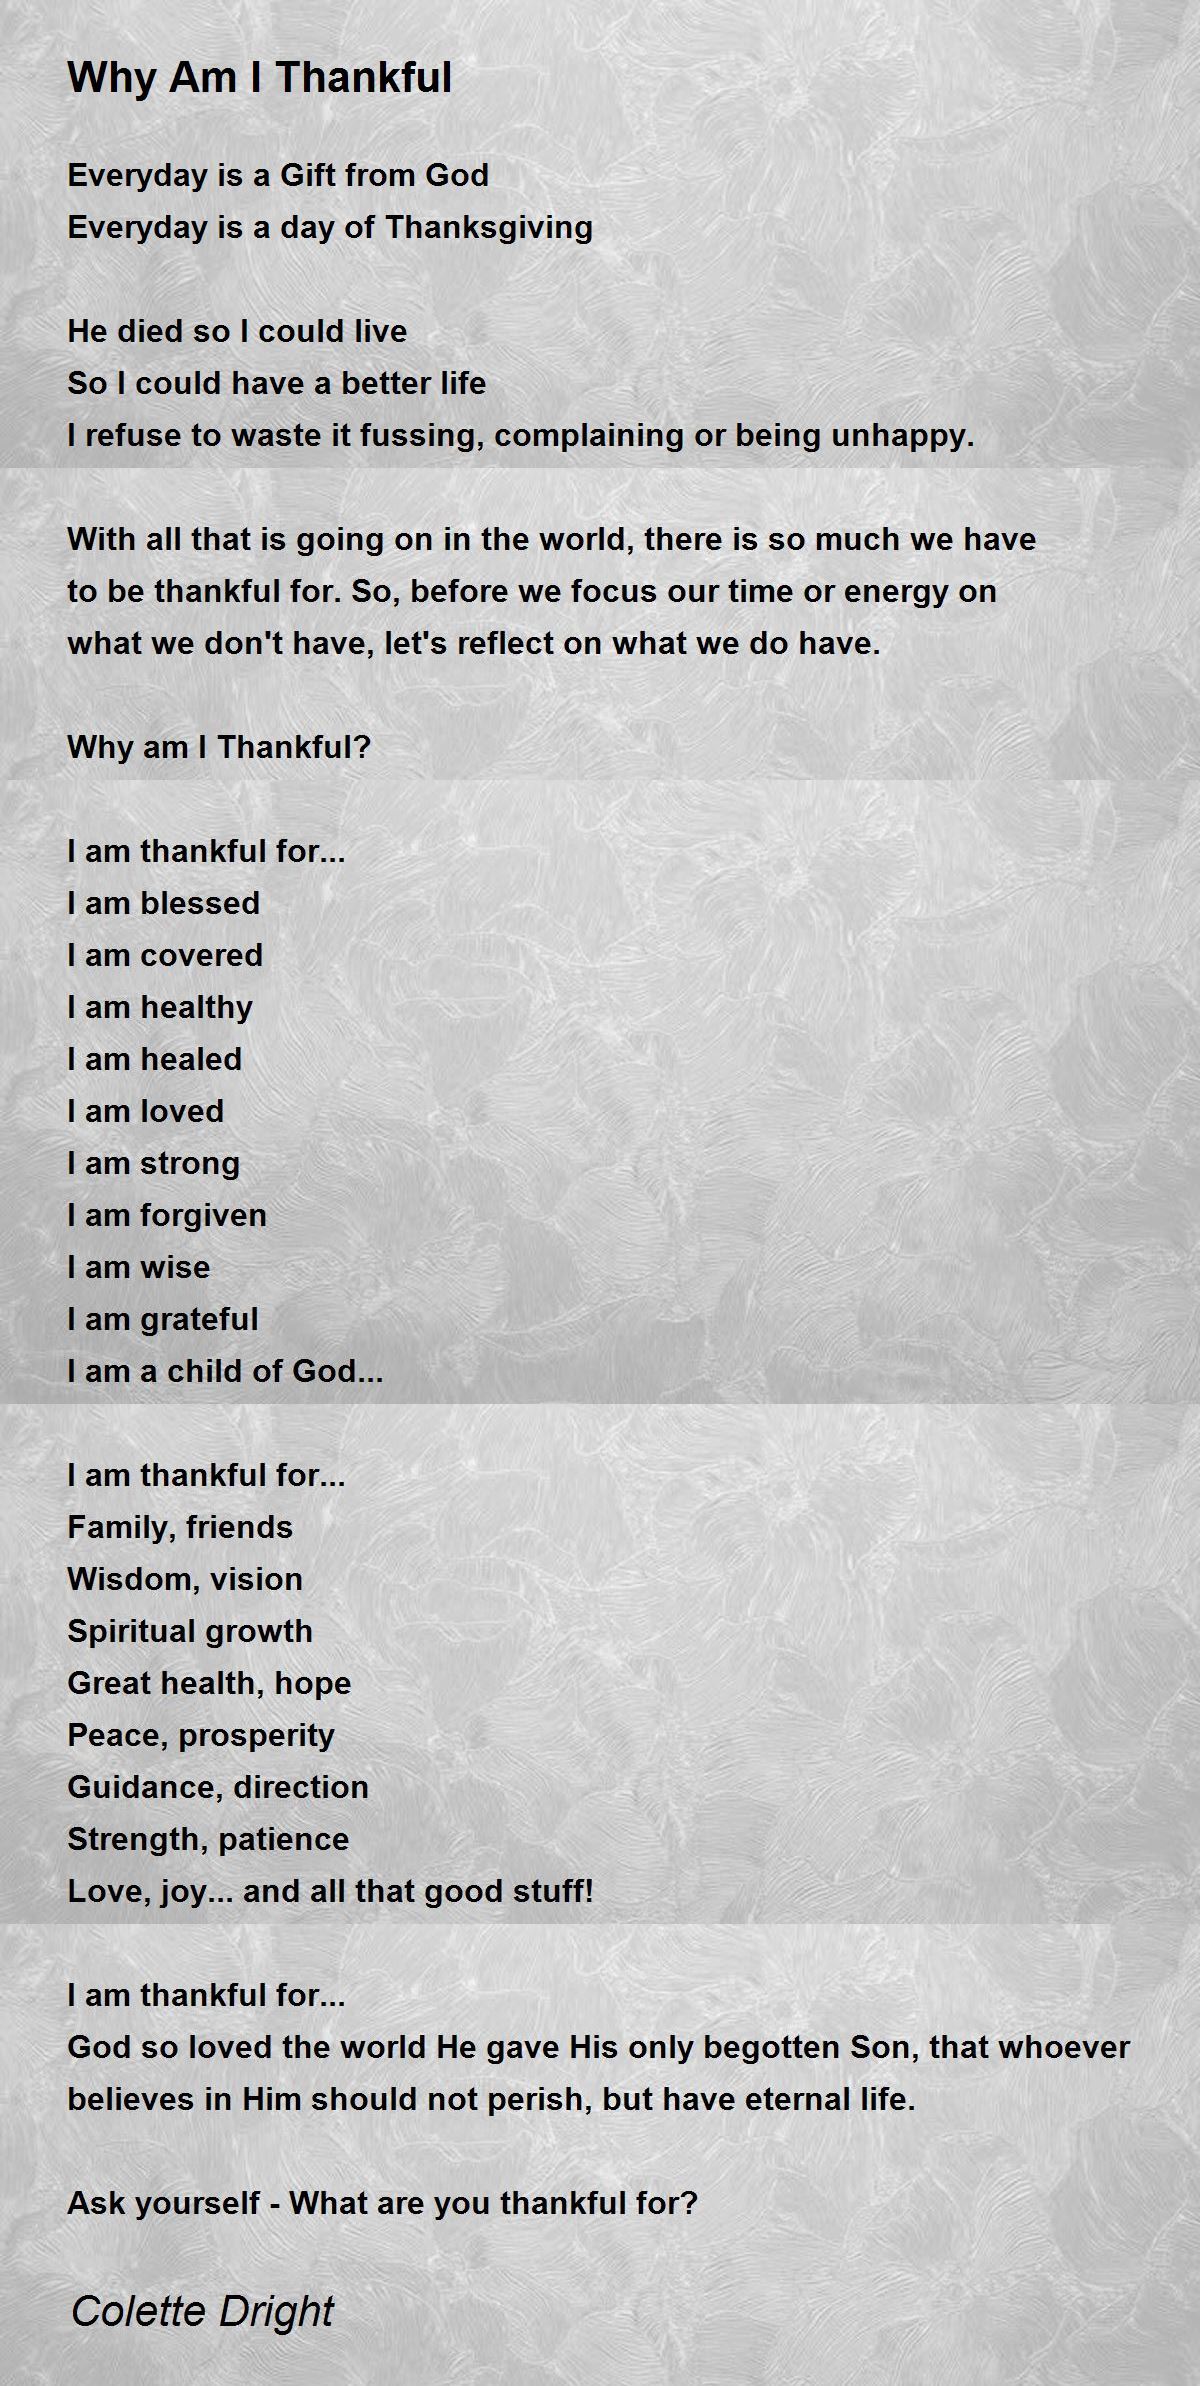 why-am-i-thankful-why-am-i-thankful-poem-by-colette-dright